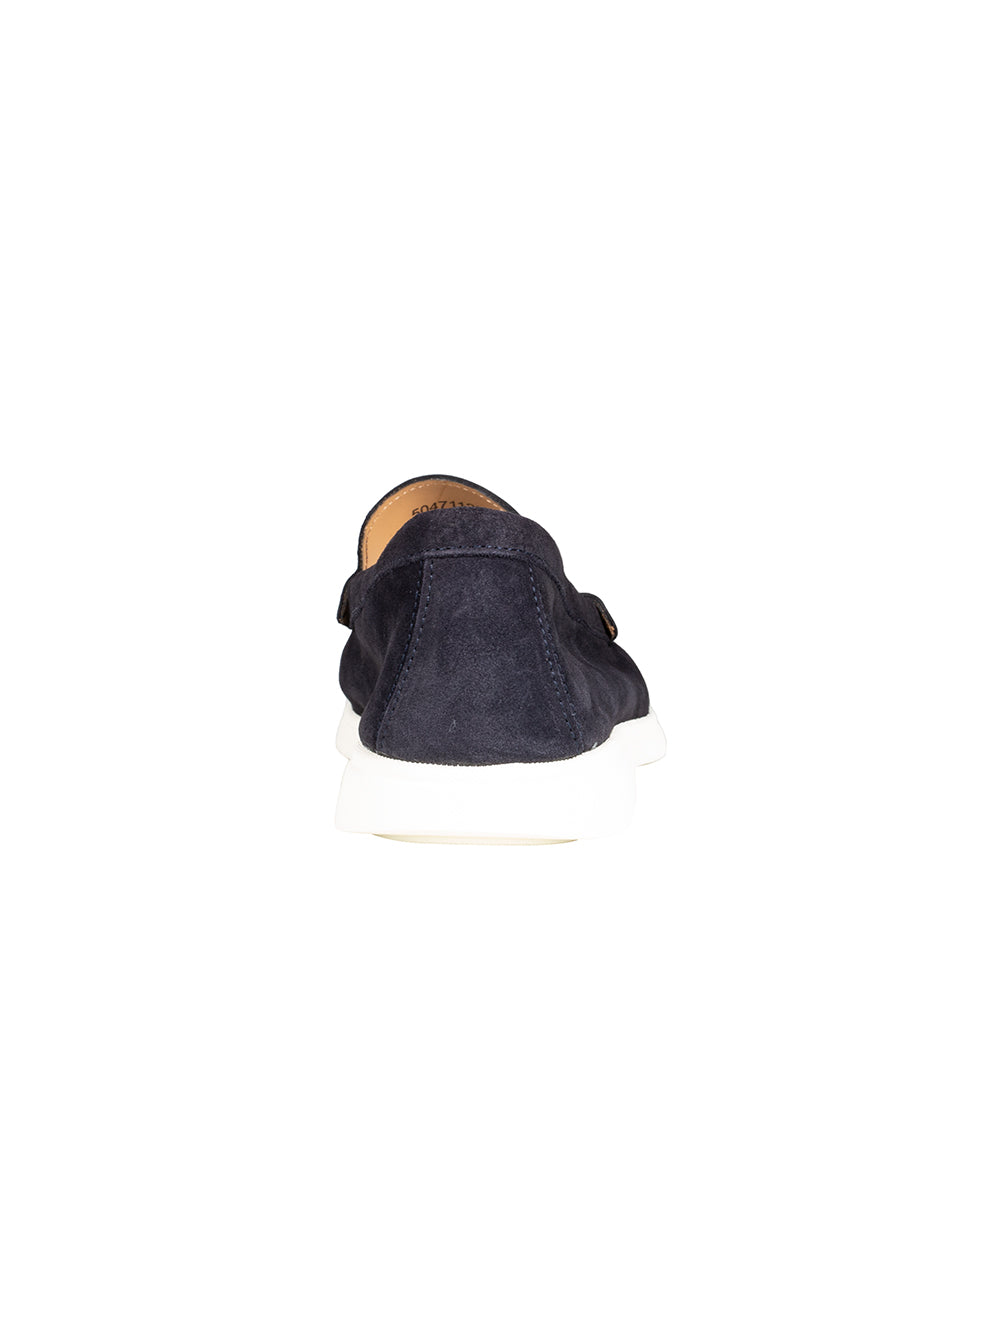 Sienne Moccasins Casual Slip Ons Navy